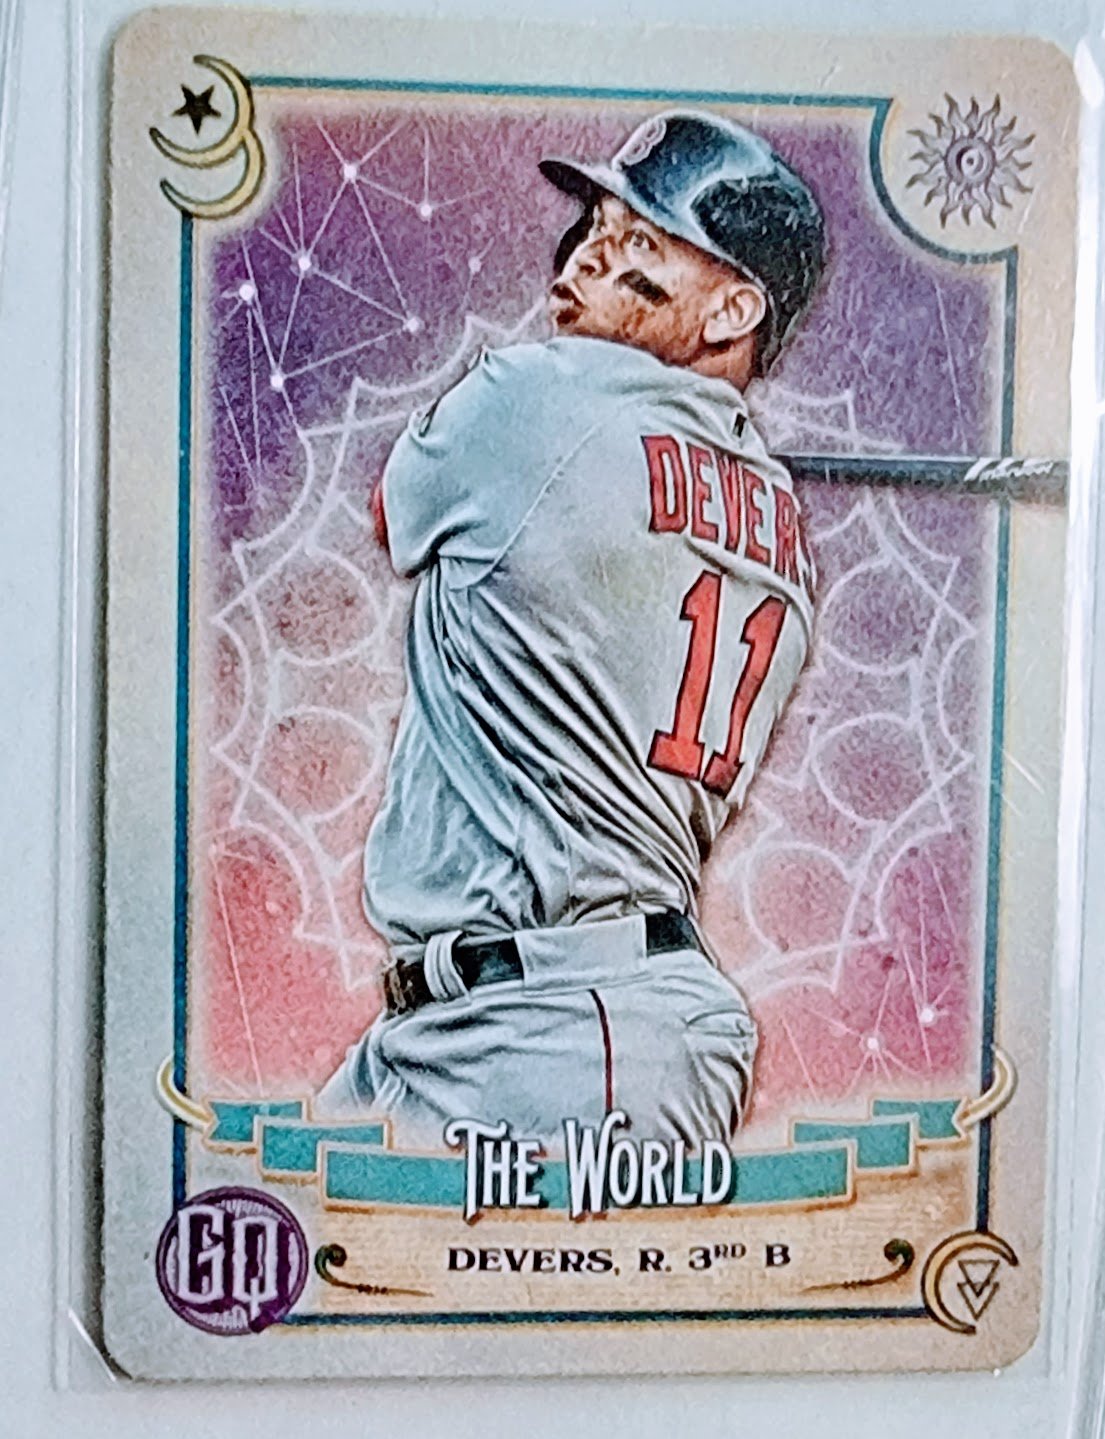 2020 Gypsy Queen Rafael Devers Tarot Of The Diamond The World Insert Red Sox Baseball Card TPTV simple Xclusive Collectibles   